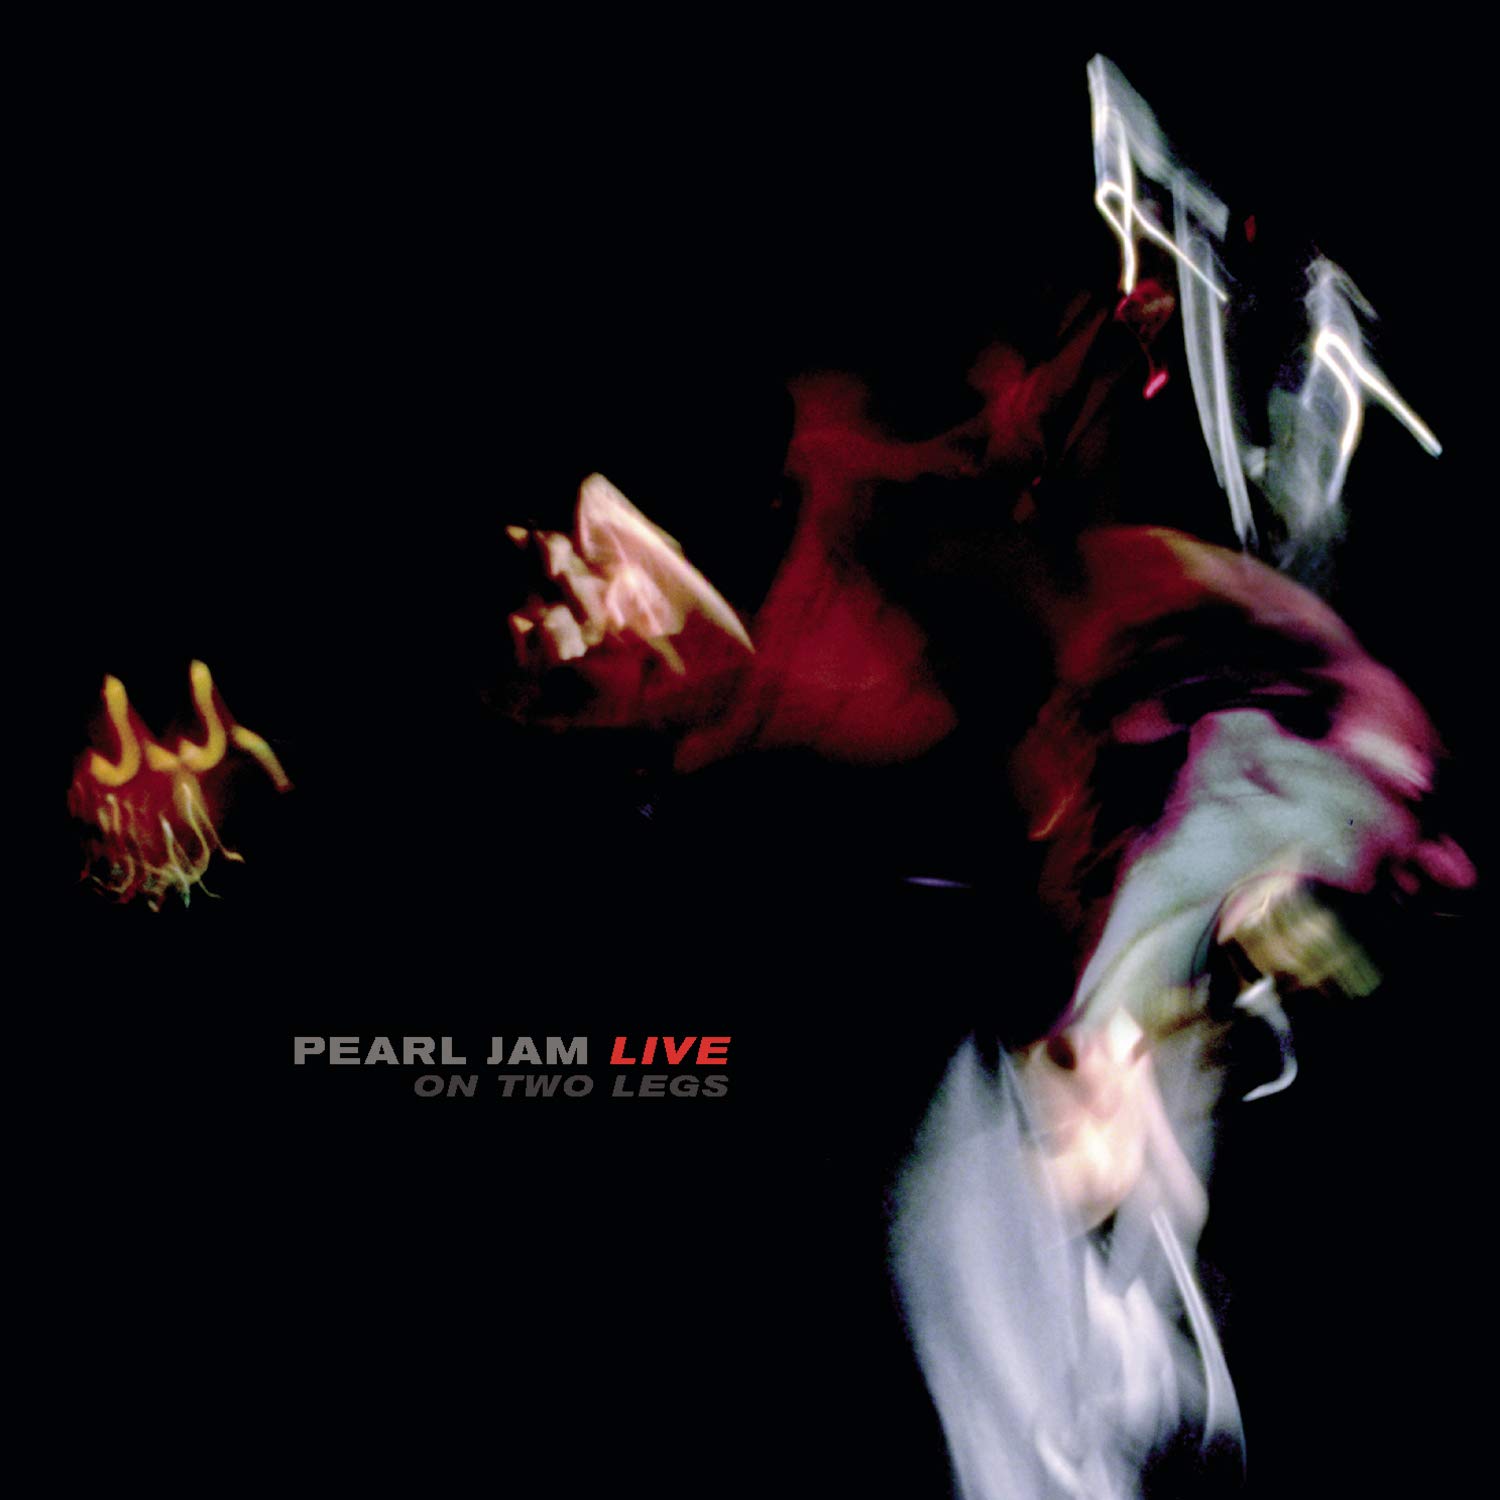 Pearl Jam "Live on Two Legs" 2LP